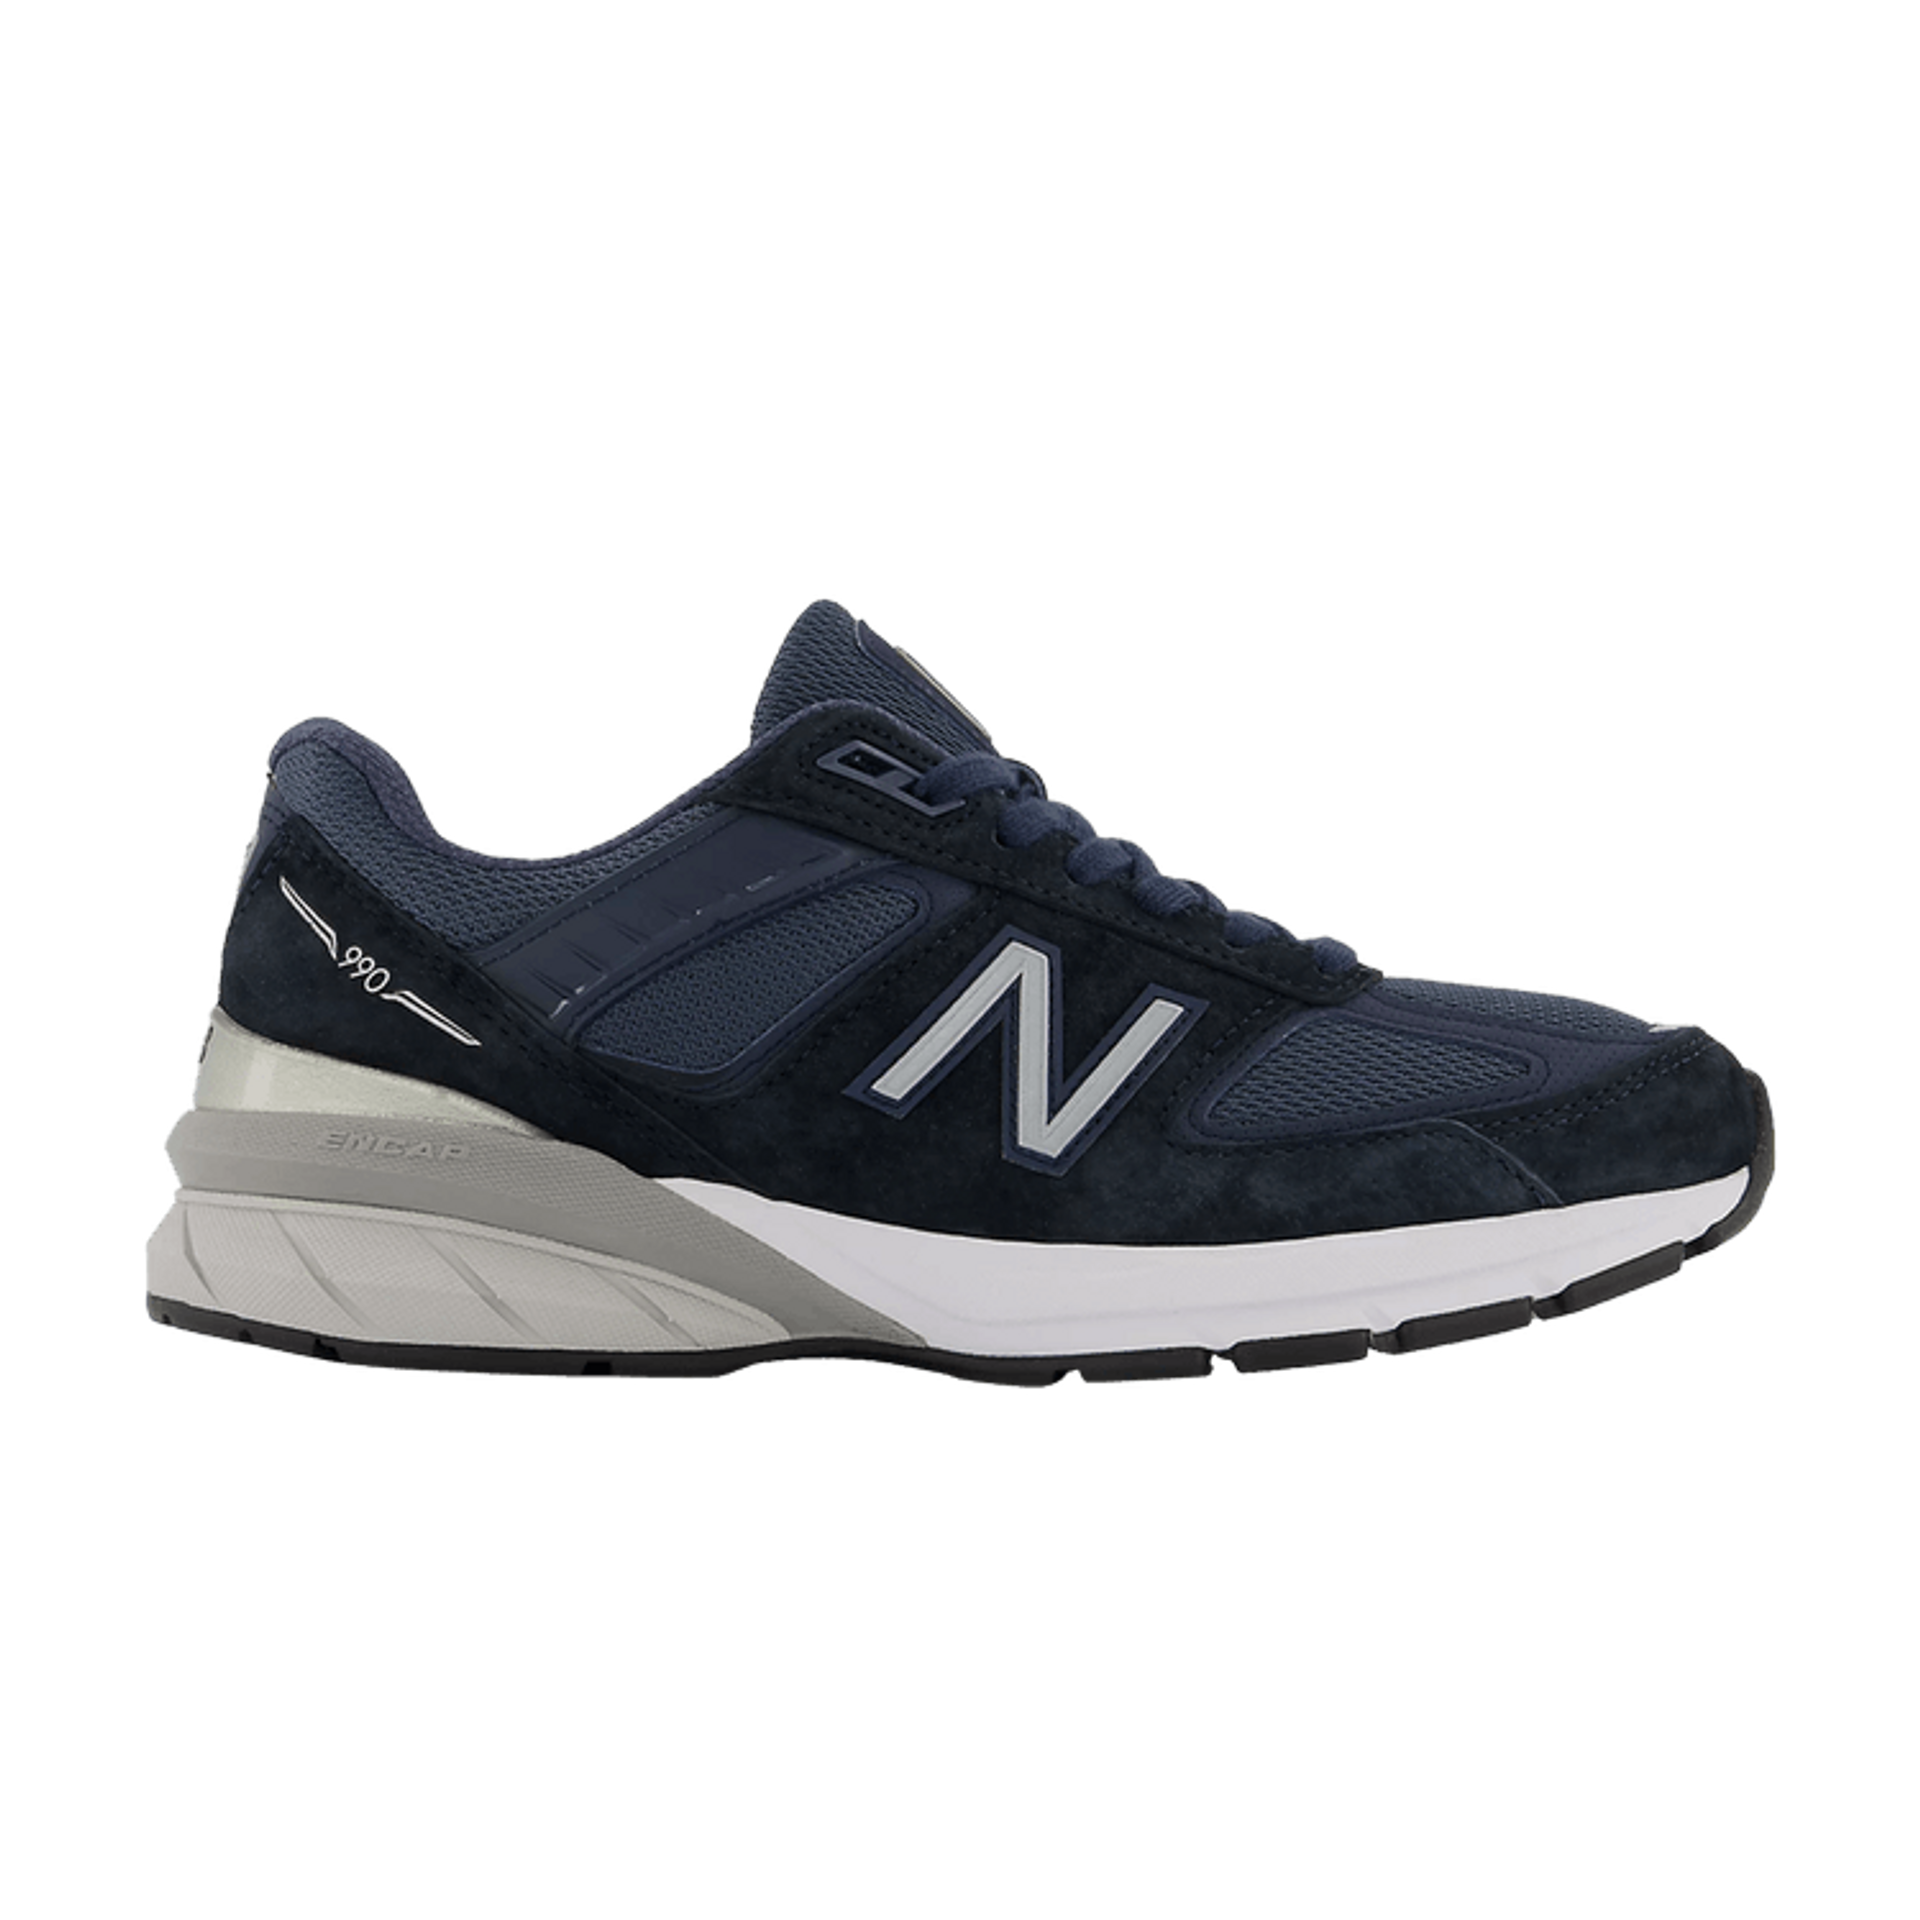 990v5 Made In USA 6E Wide 'Navy'